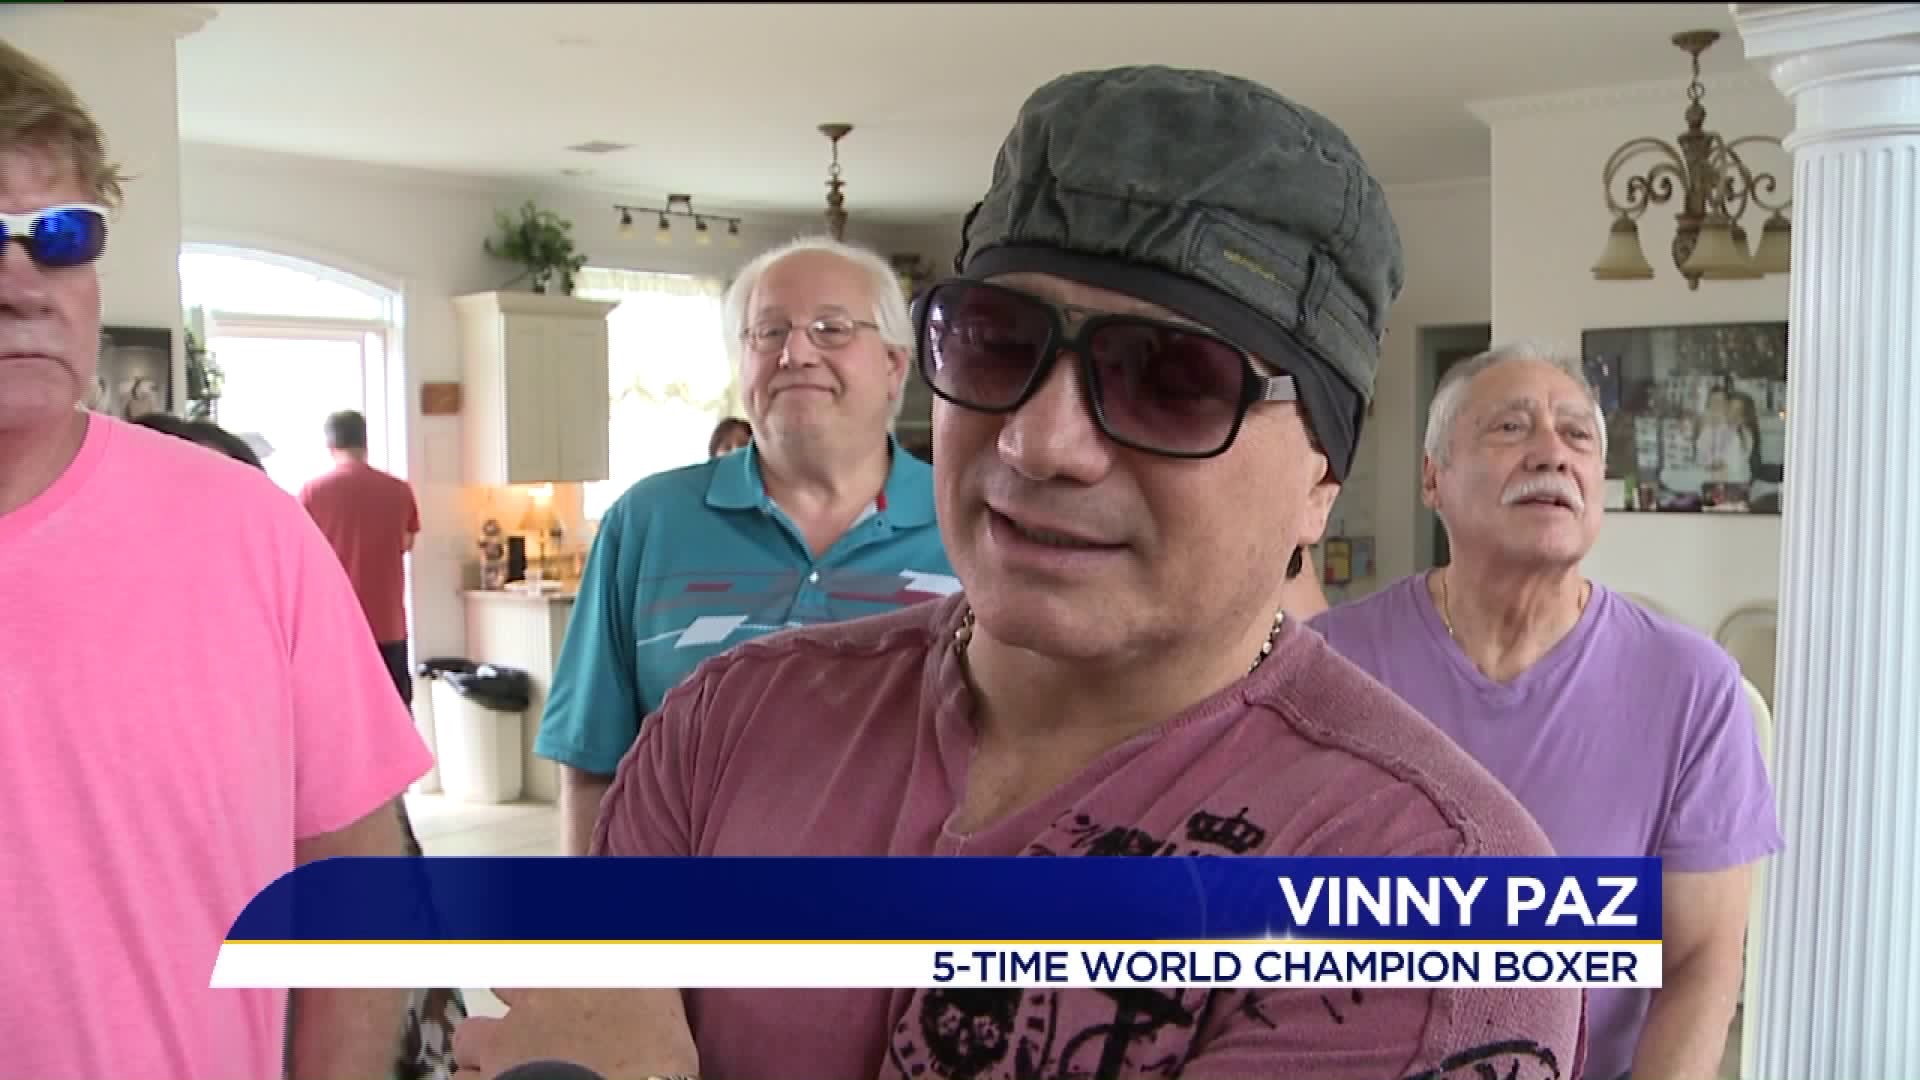 Vinny Paz Impressed by "Bleed for This"